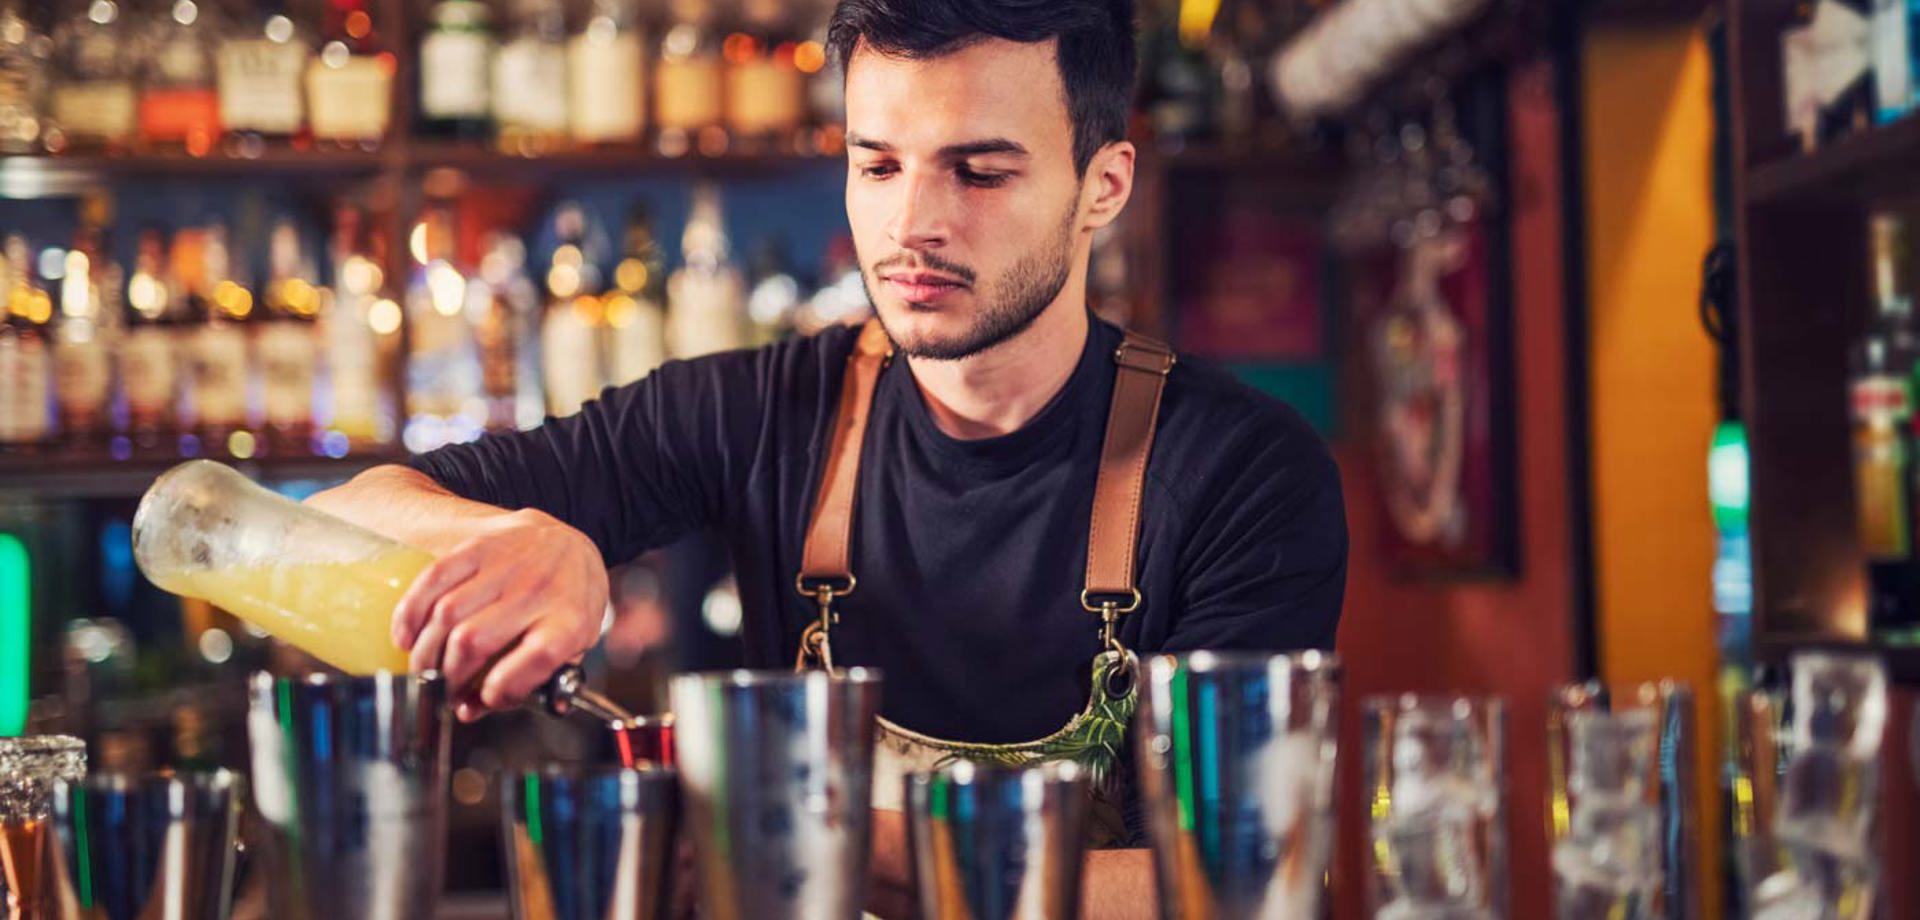 A male bartender standing behind a bar preparing a cocktail. He is pouring a spirit into a shot glass. On the bar there are different size cocktail shakers.